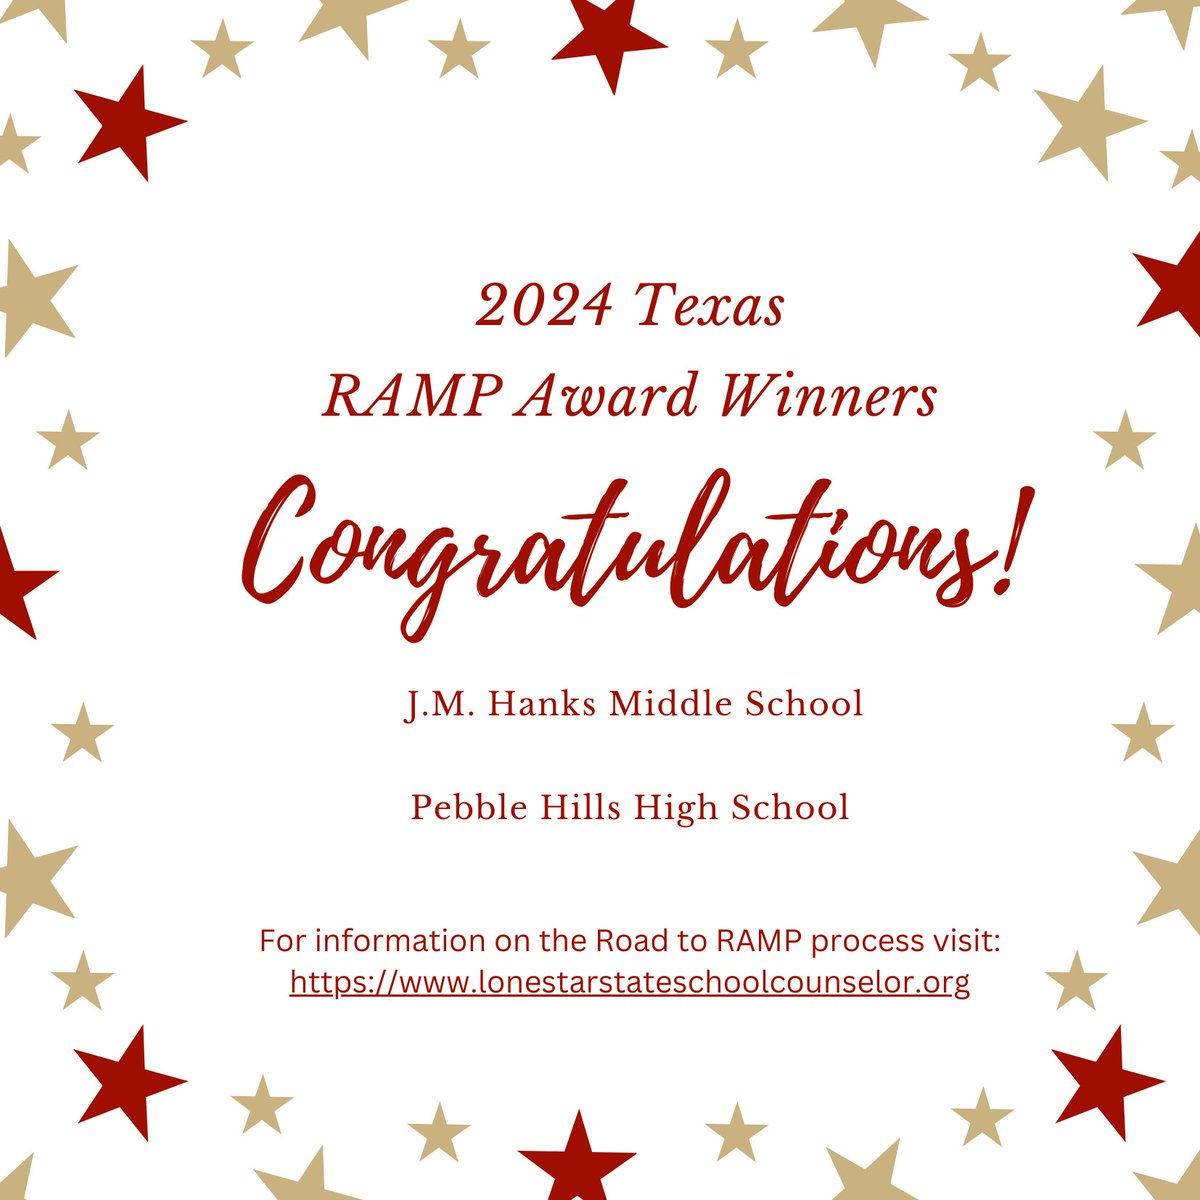 Congratulations to following Texas school counseling programs @HANKSMSYISD @PHHS_Counselors for receiving national recognition by earning the RAMP award for delivering exceptional comprehensive school counseling programs! Way to go! #Keepitcomprehensive #RAMP24 #ASCA @ASCAtweets